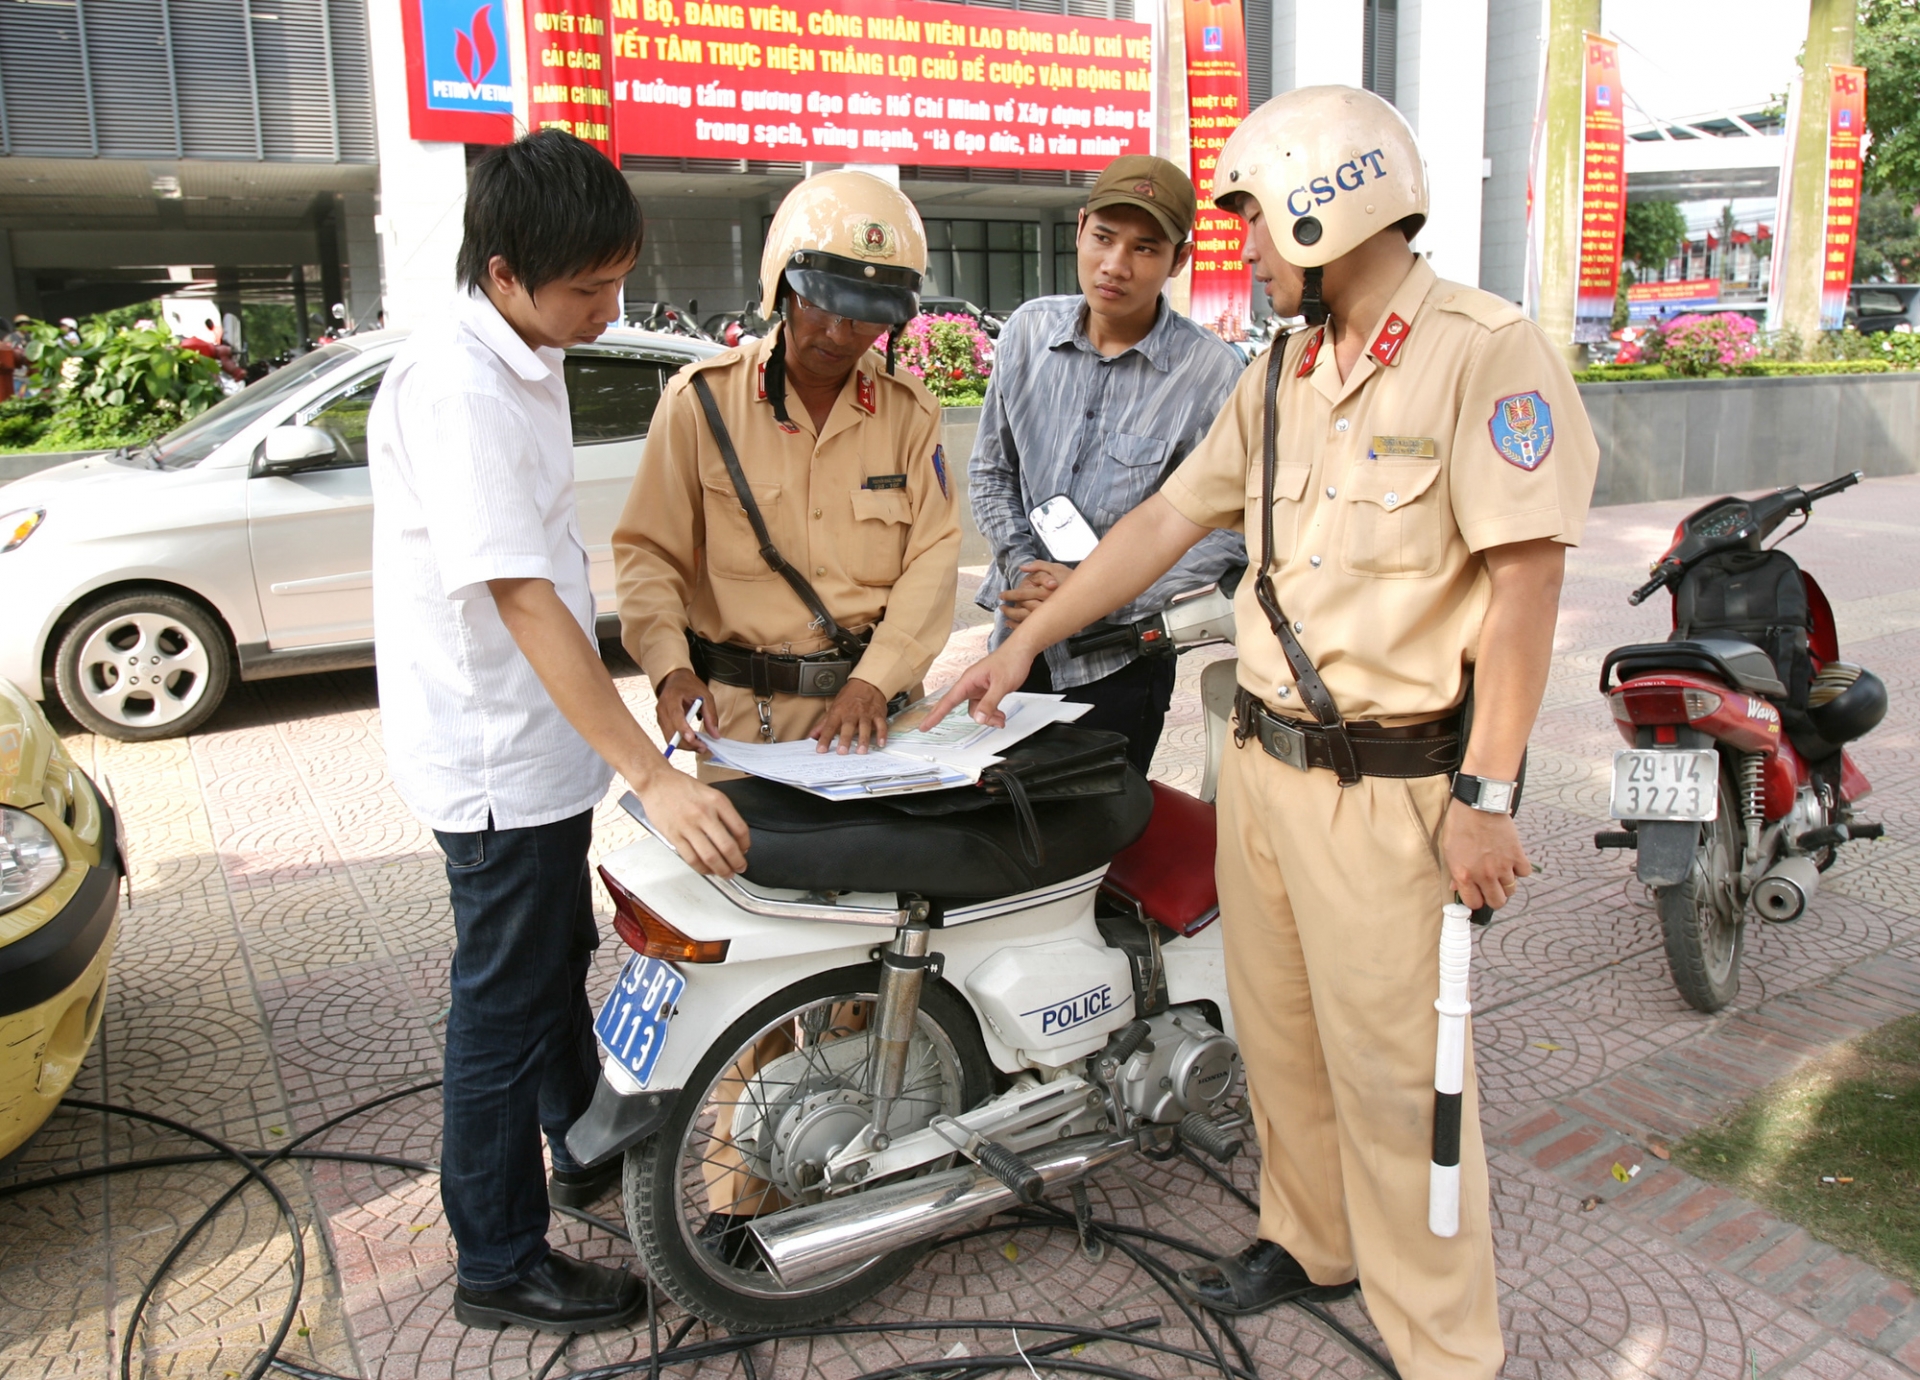 new policy in vietnam vehicles not confiscated for traffic violation if there is guarantee money